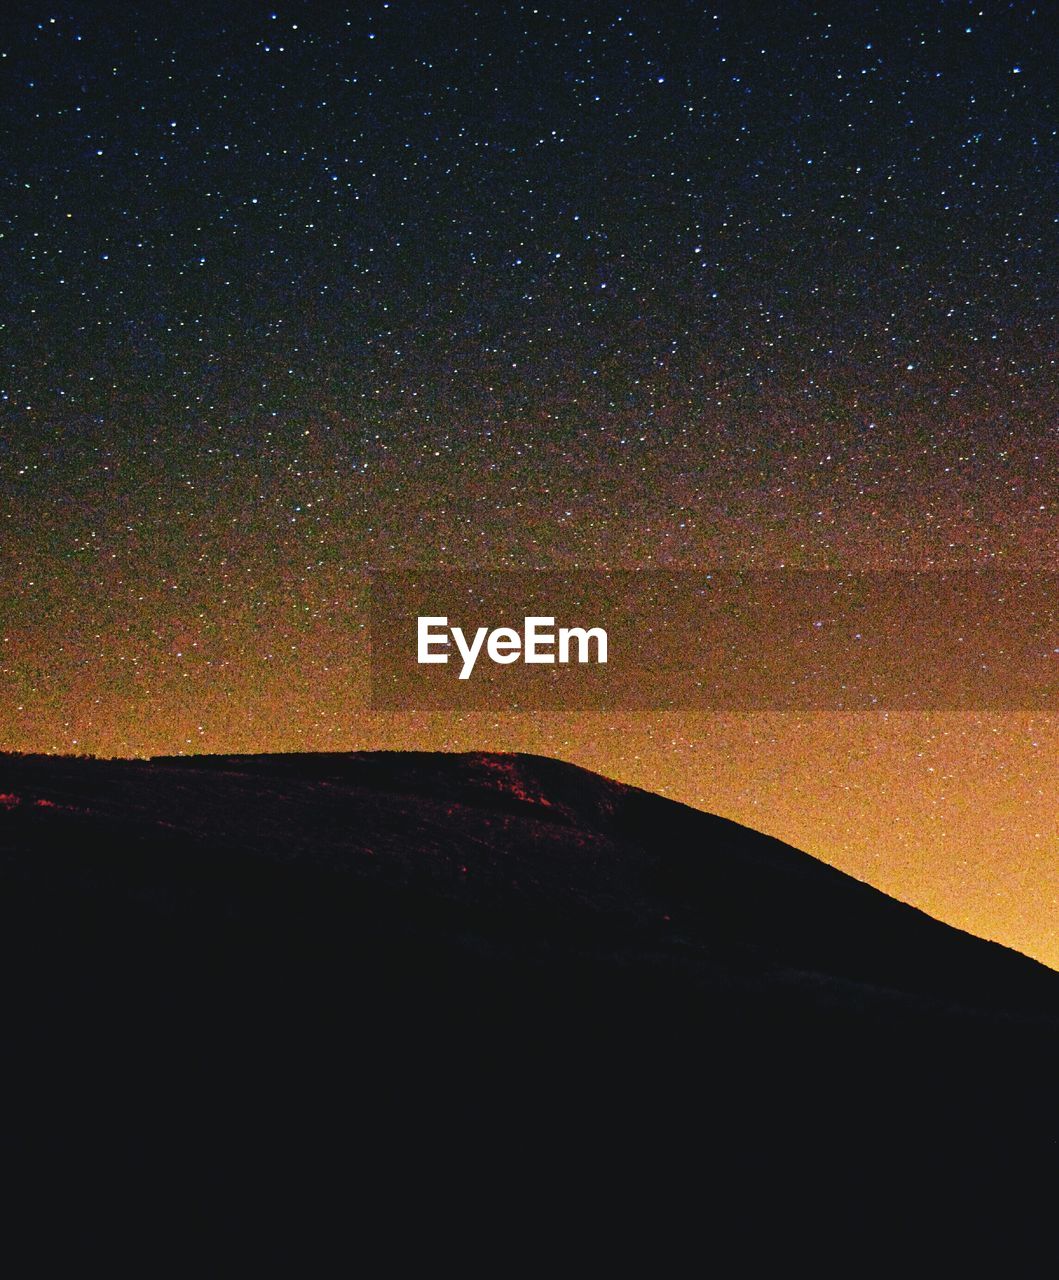 Scenic view of silhouette mountain against star field at night